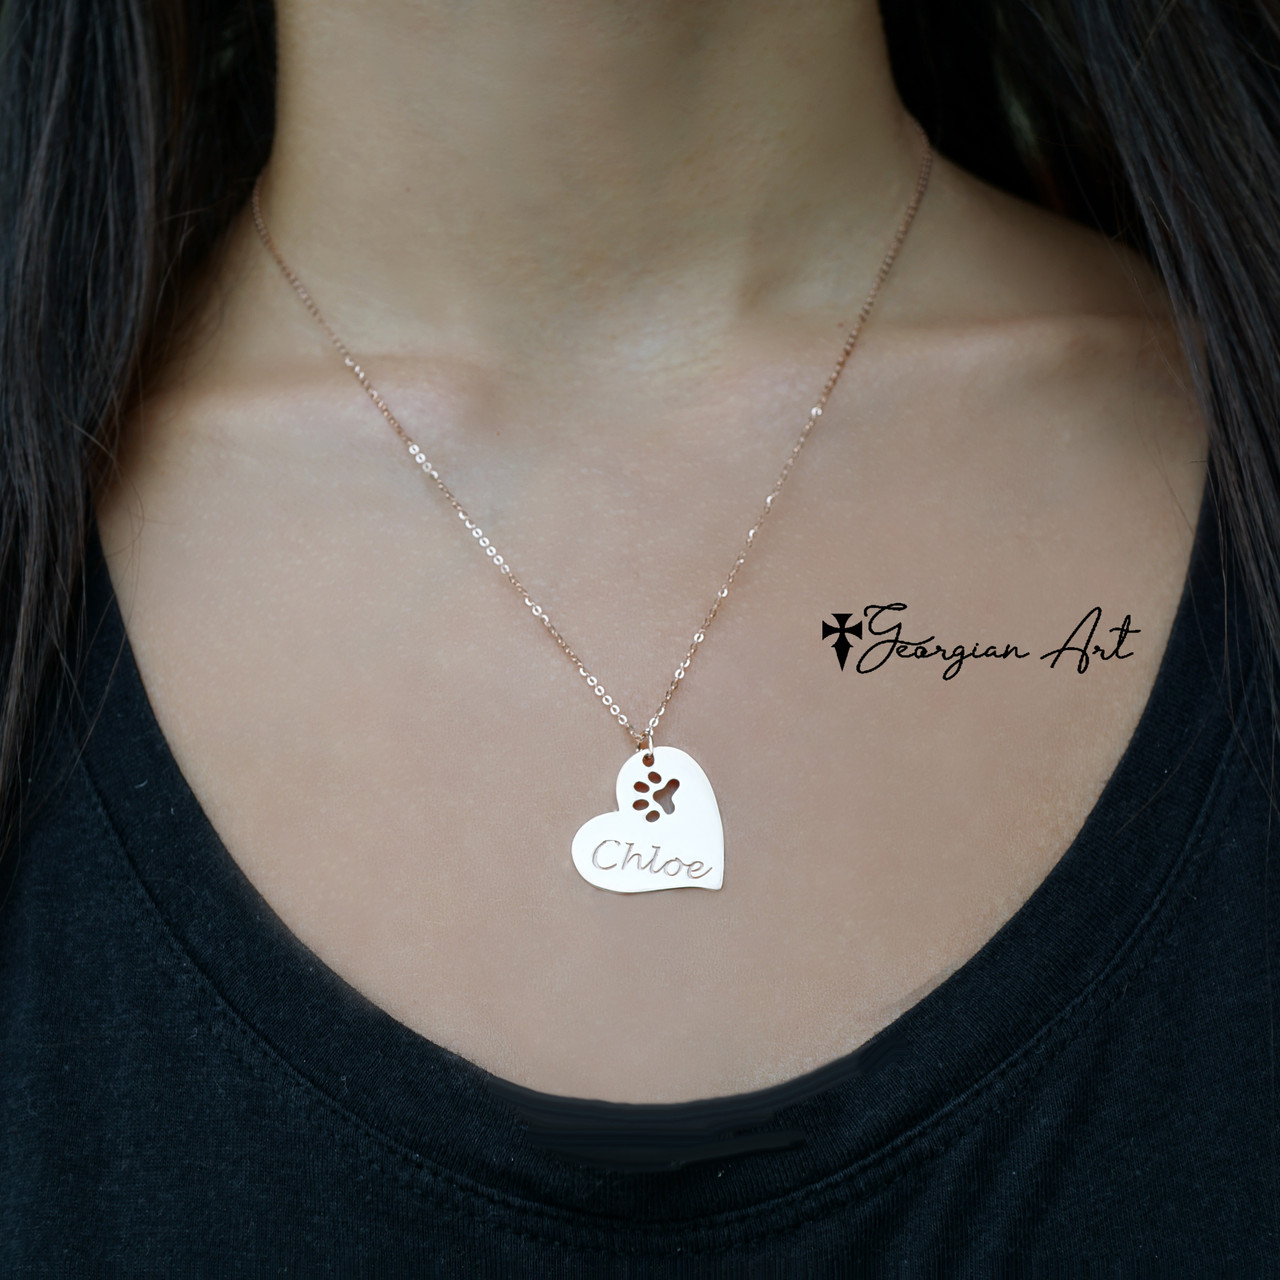 Large Heart Paw Print necklace w logo 43976.1632326200.1280.1280